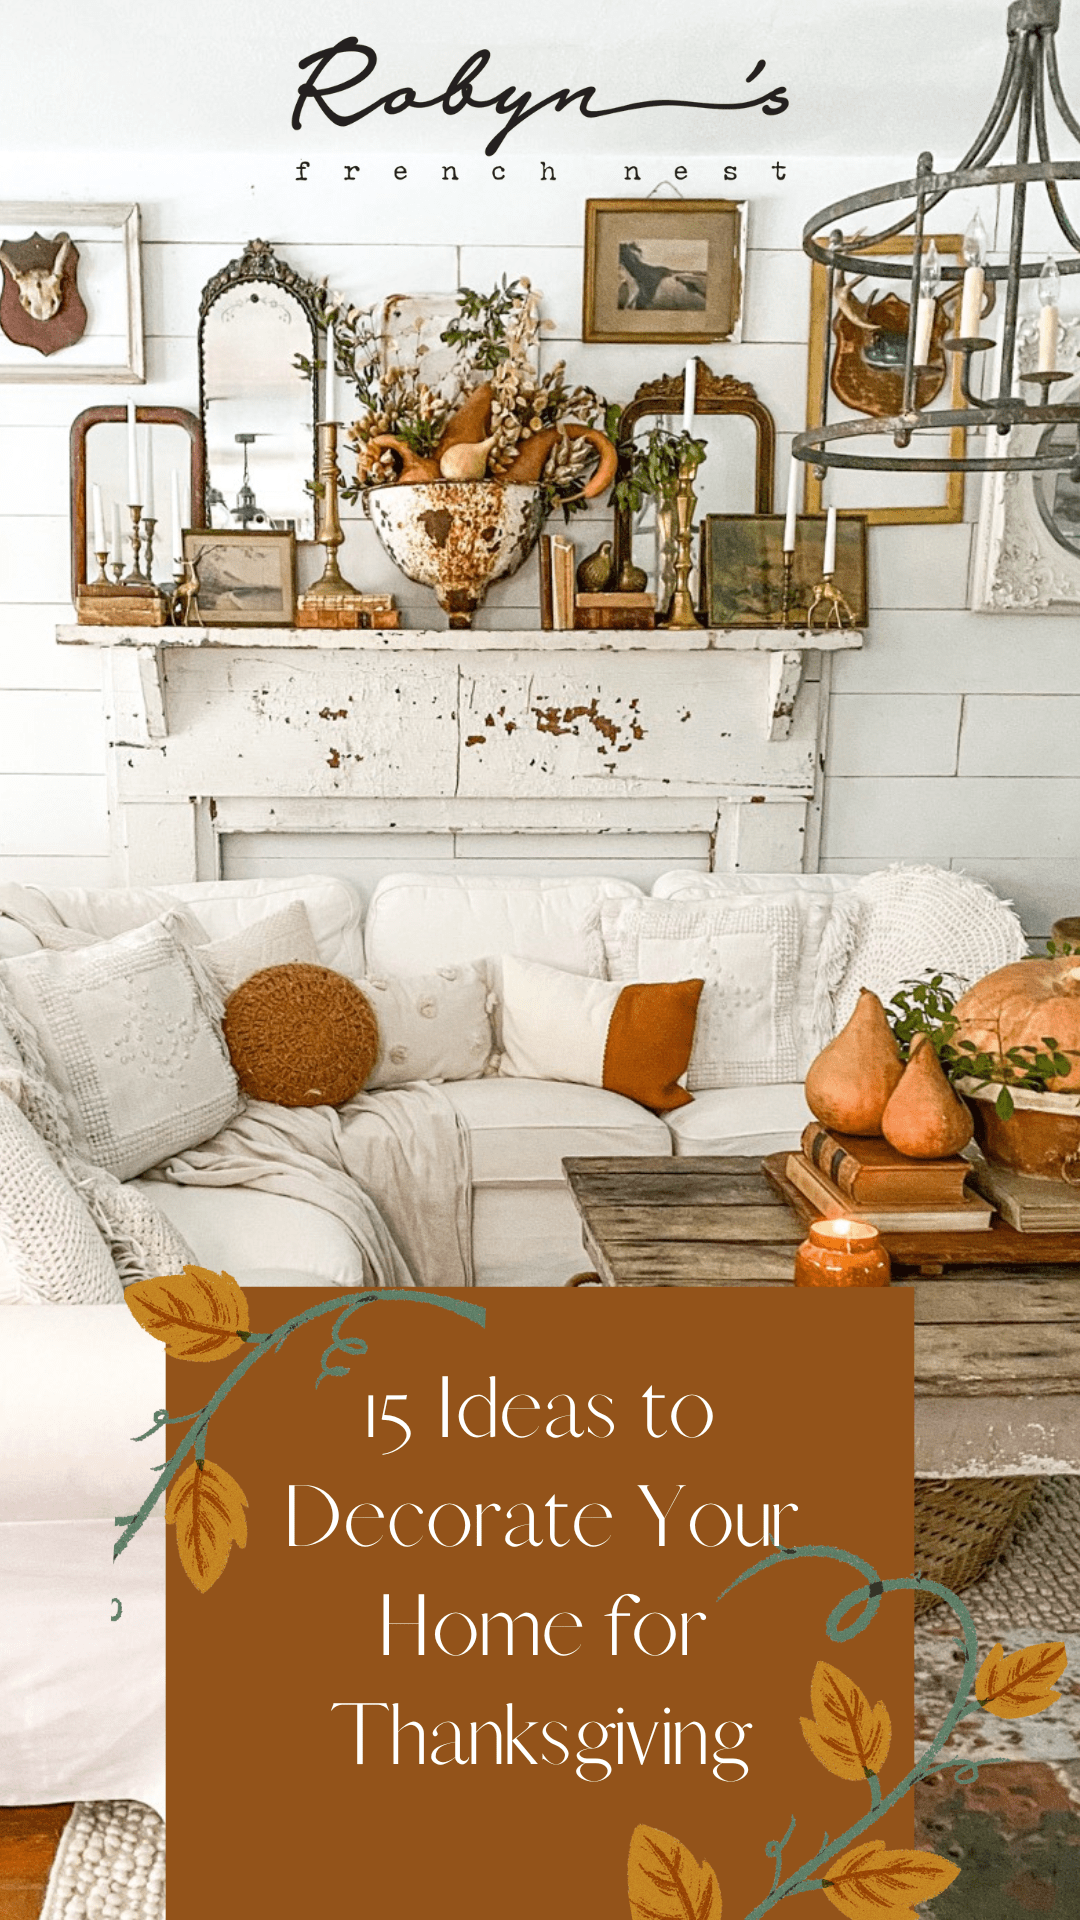 15 of the Best Thanksgiving Decor Ideas and Inspirations